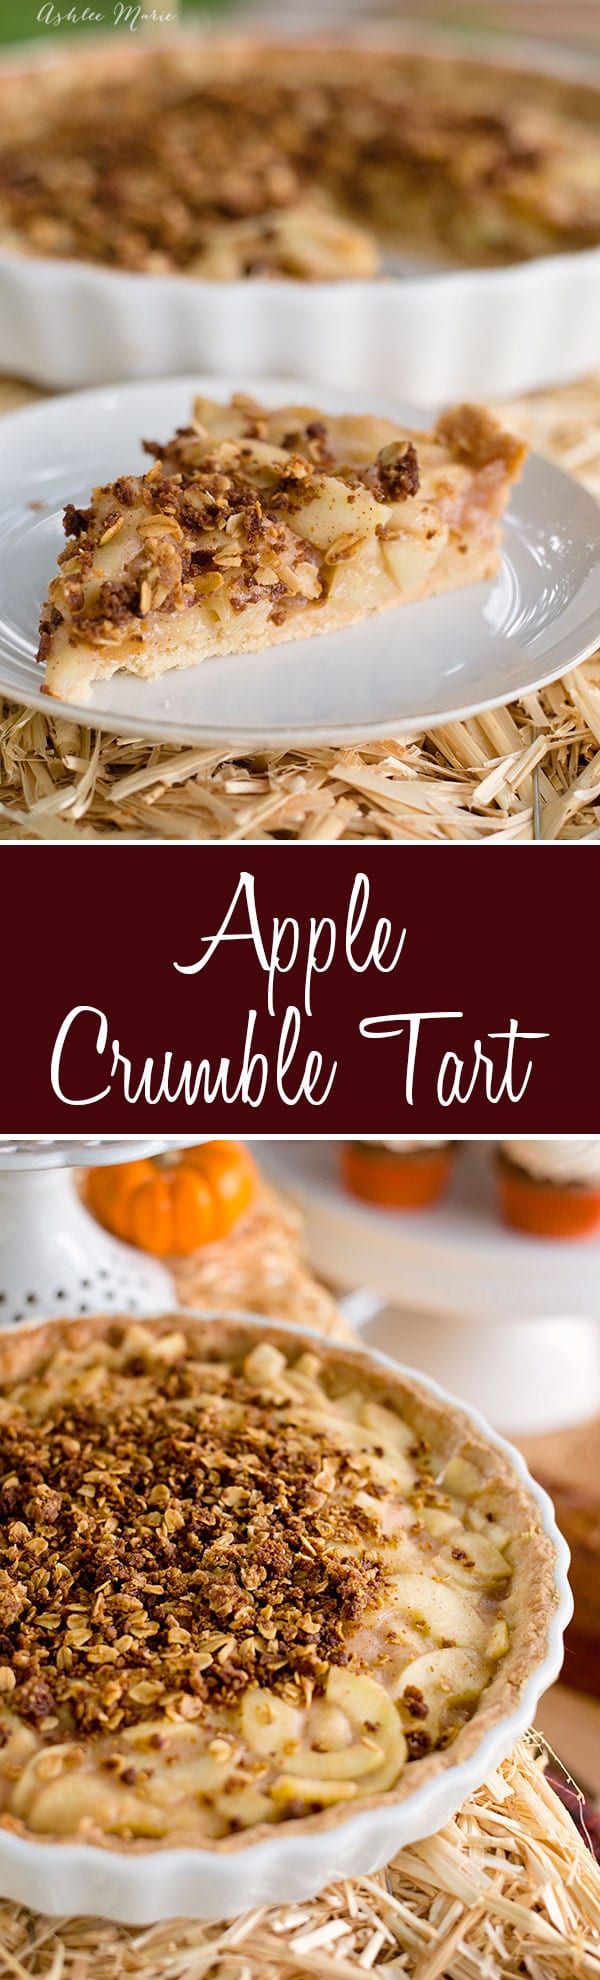 Similar to an apple pie in flavor the tart crust, filling and crumble are all cooked separately then put together for a delicious dessert with a great crunch